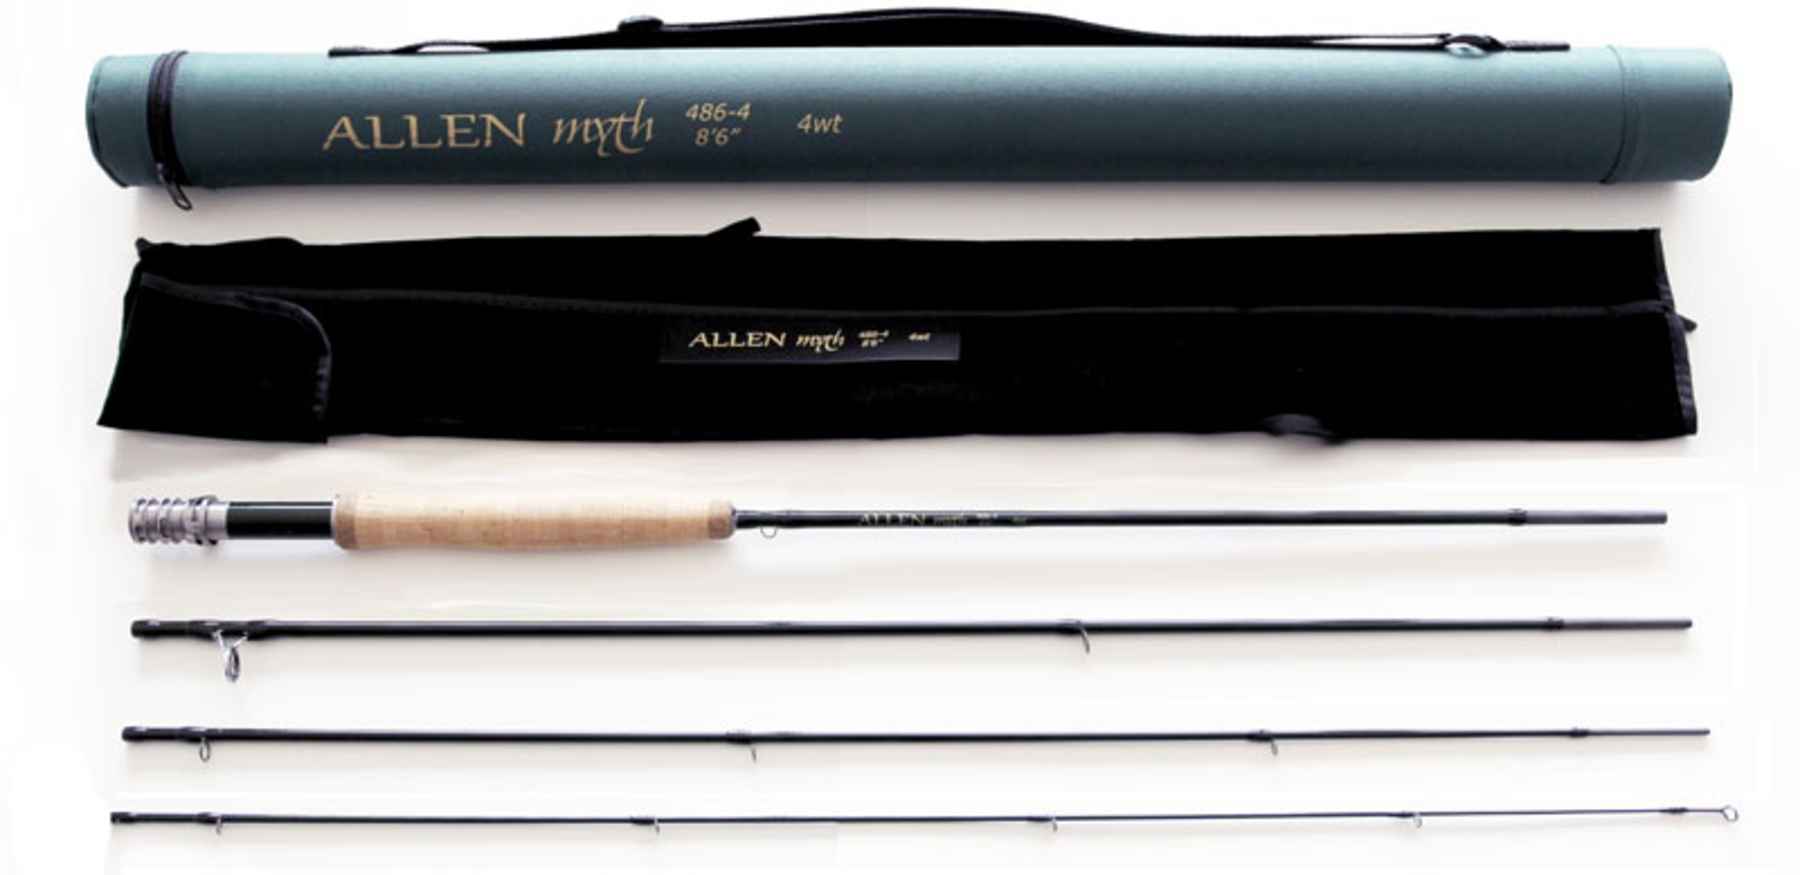 Allen Offering Big Discounts on Certain Xa and Myth Series Rods